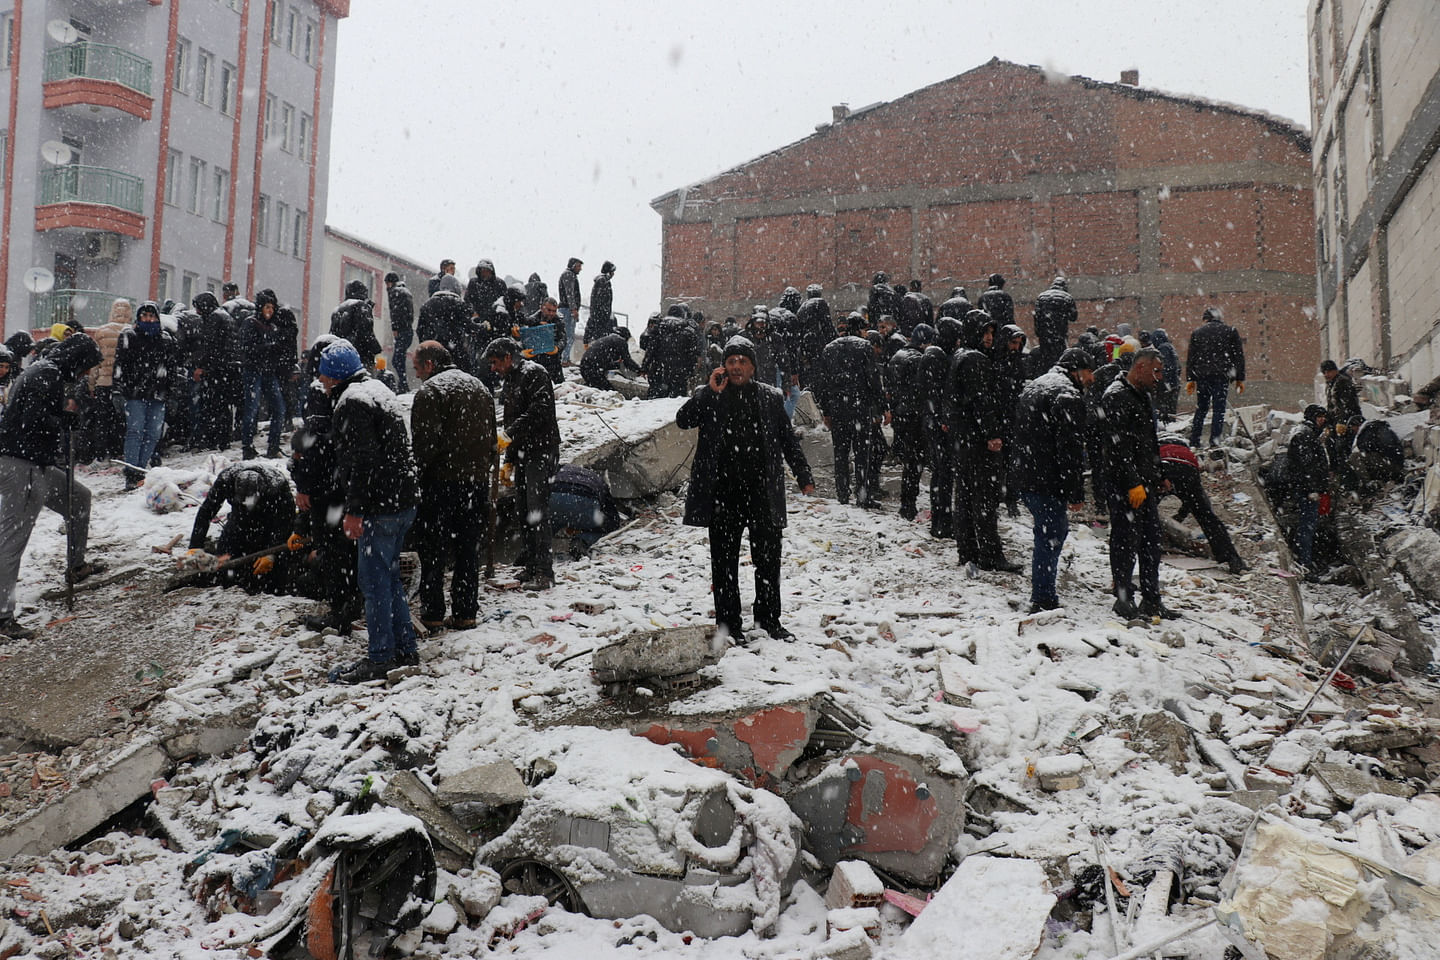 Rescuers carry out a person from a collapsed building after an earthquake in Malatya, Turkey February 6, 2023